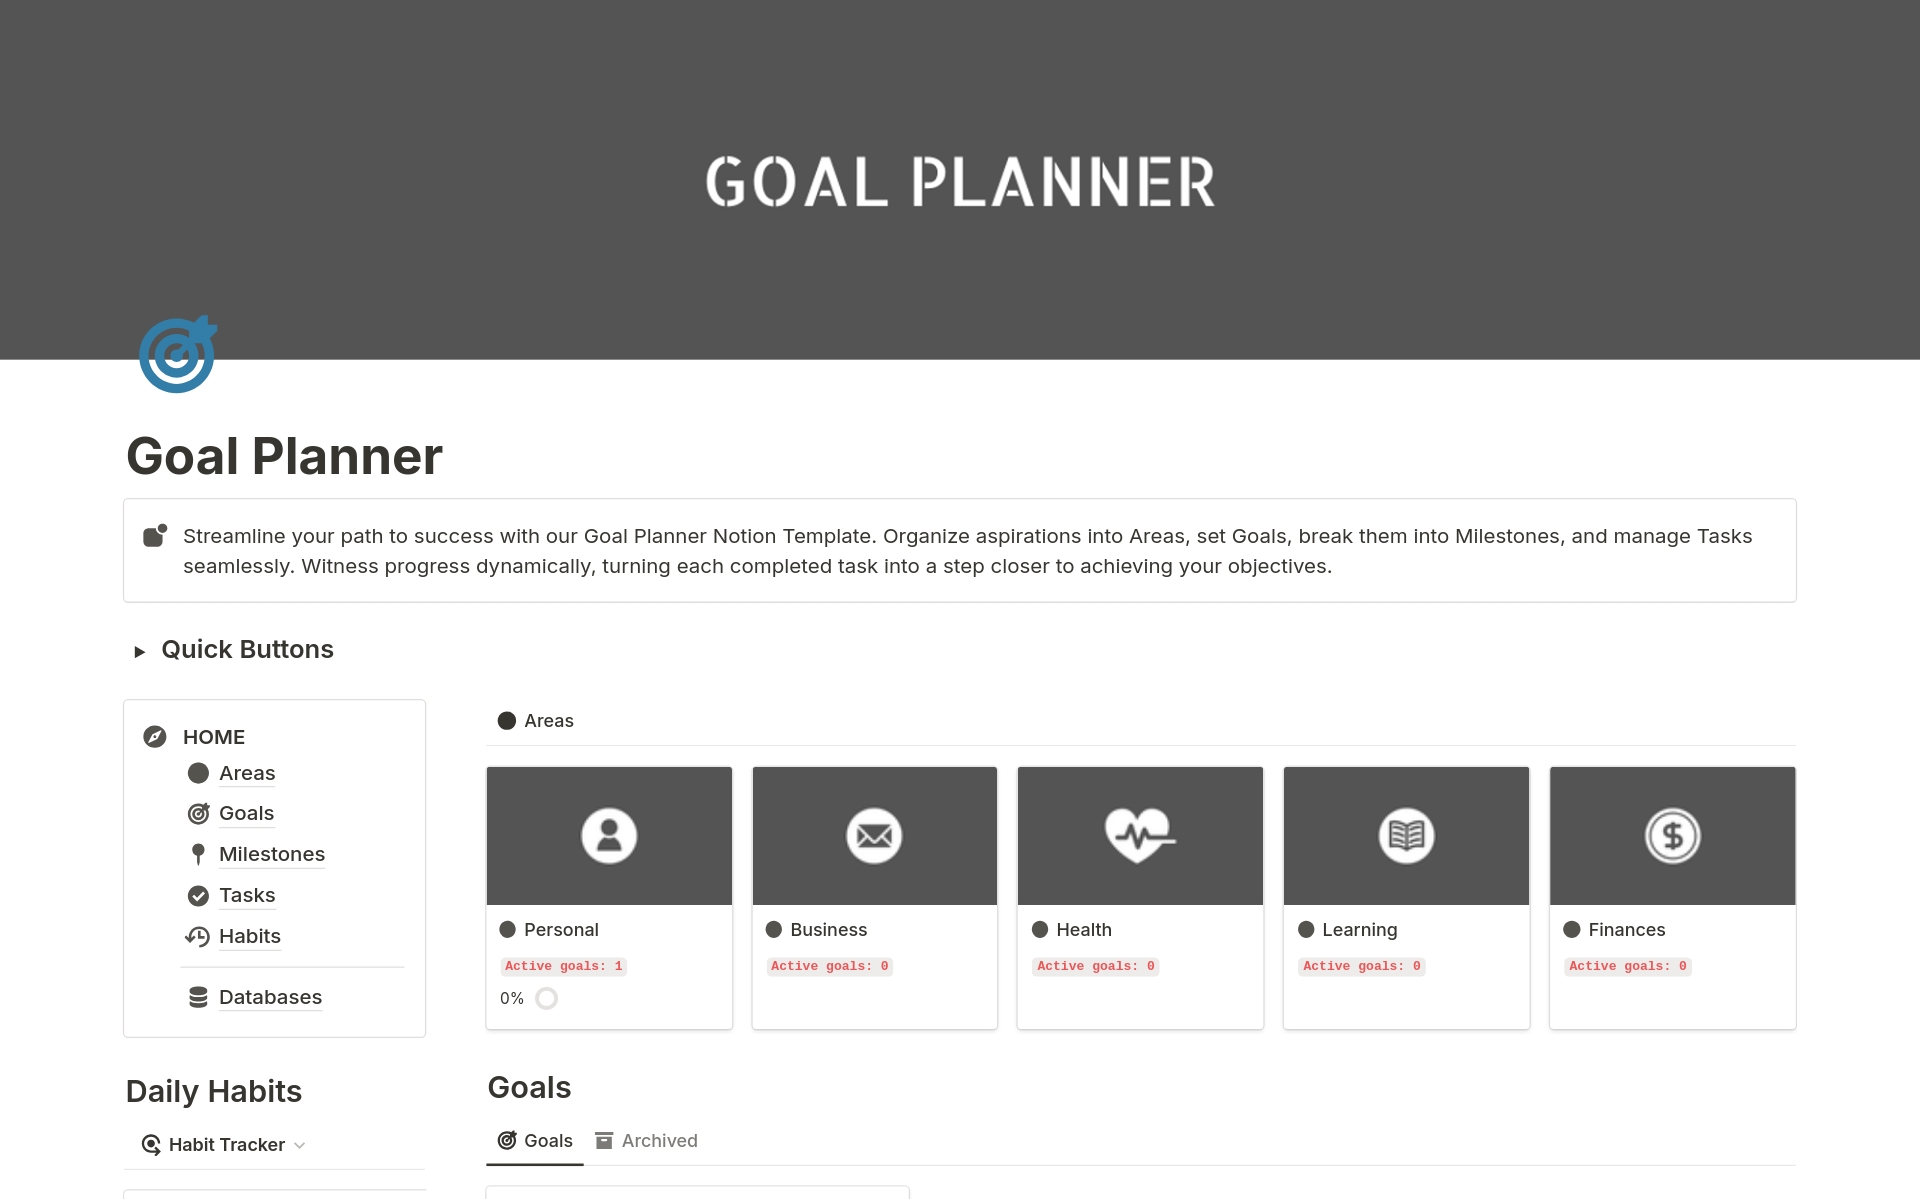 Streamline your path to success with our Goal Planner Notion Template. Organize aspirations into Areas, set Goals, break them into Milestones, and manage Tasks seamlessly. Witness progress dynamically, turning each completed task into a step closer to achieving your objectives.